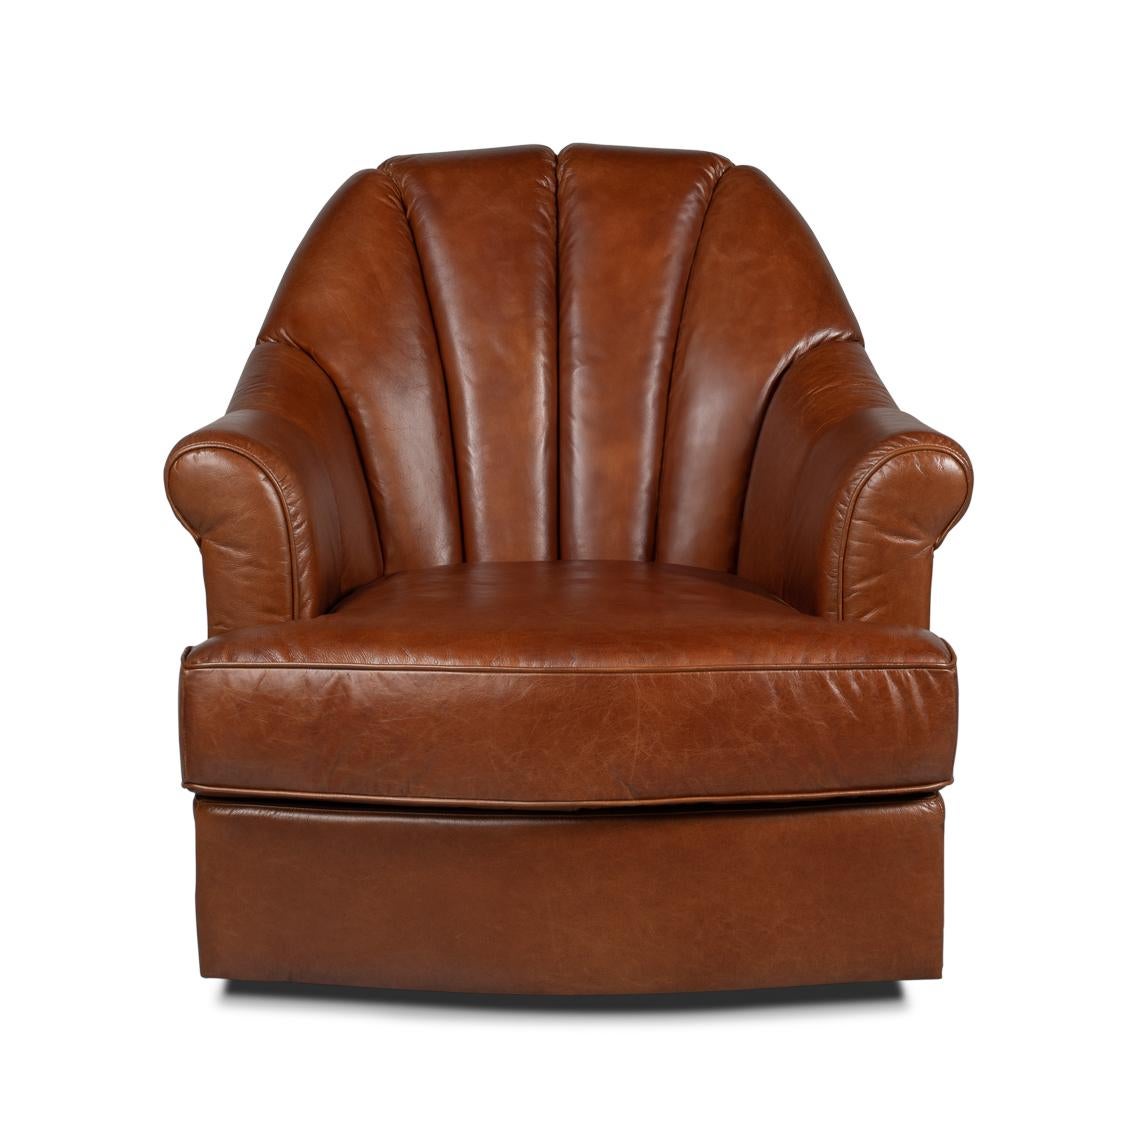 A haven of relaxation where classic design meets cloud-like comfort. With its generously padded, rolled armrests and deep, inviting seat cushion, this chair is a call to leisure, crafted in premium full-grain leather that exudes warmth and